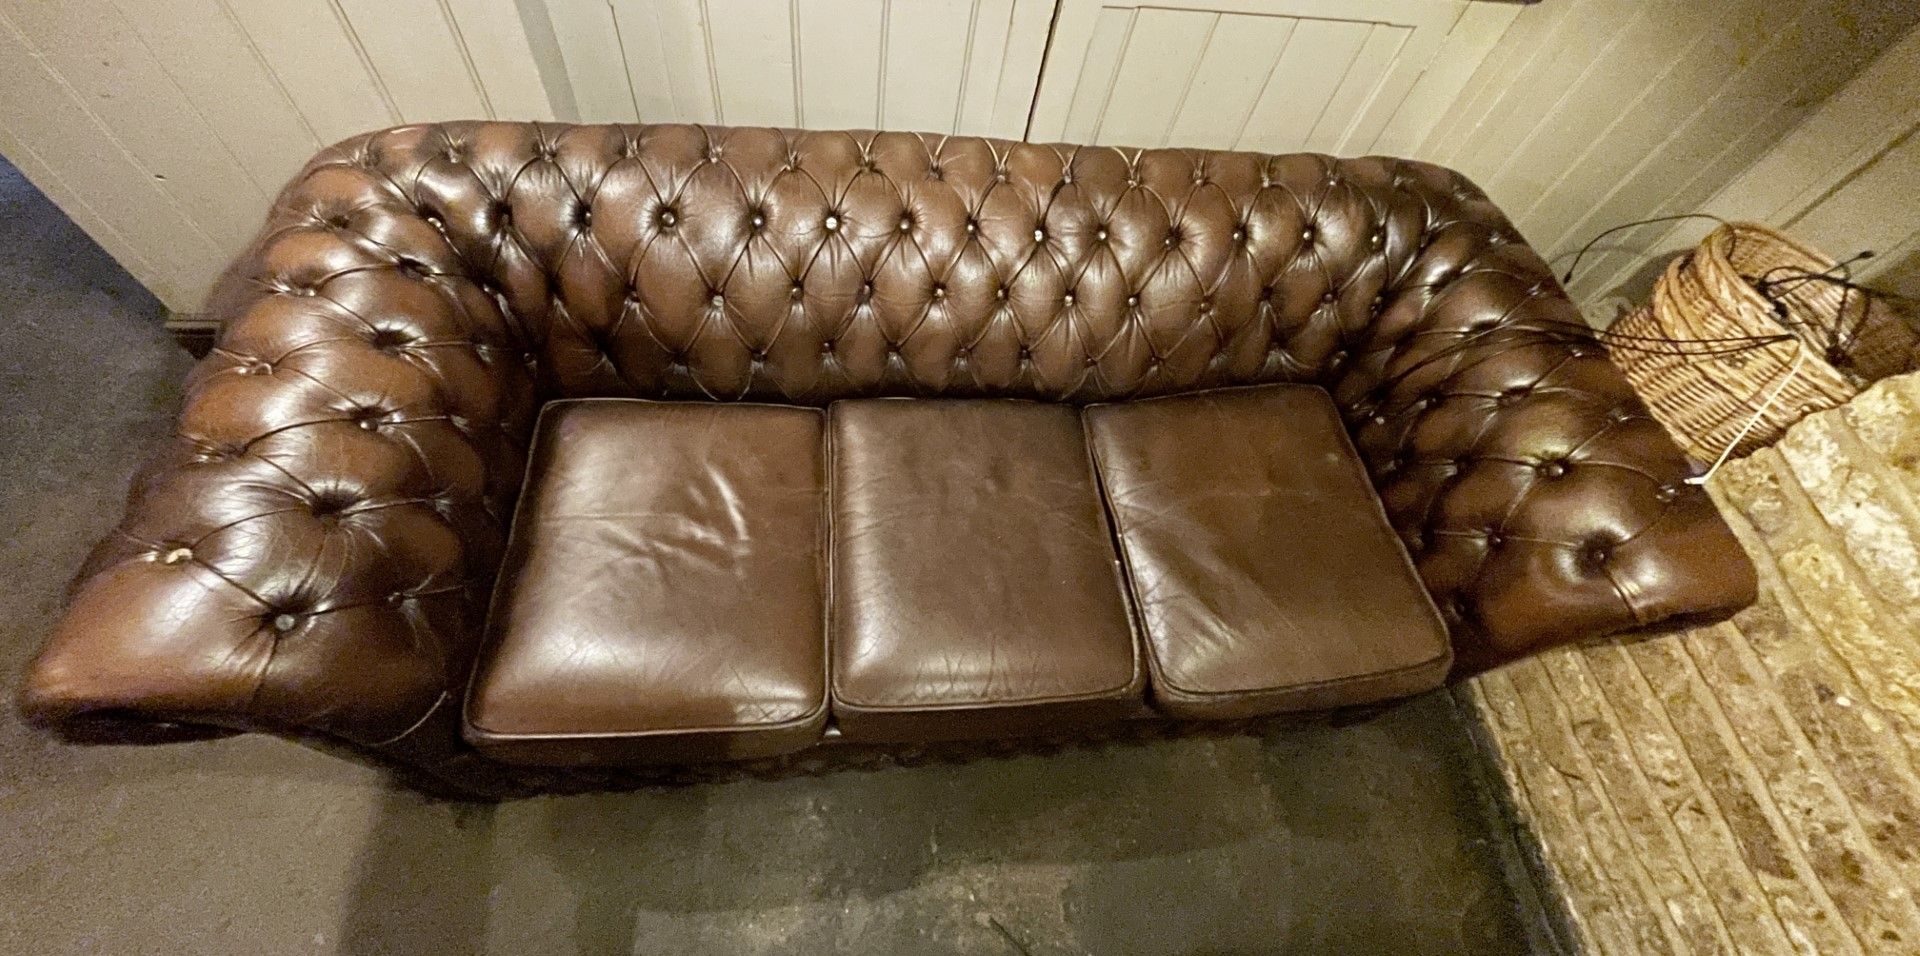 1 x Vintage Premium Handmade Brown Leather Button-back Chesterfield 3-Seater Studded Sofa - Image 8 of 8